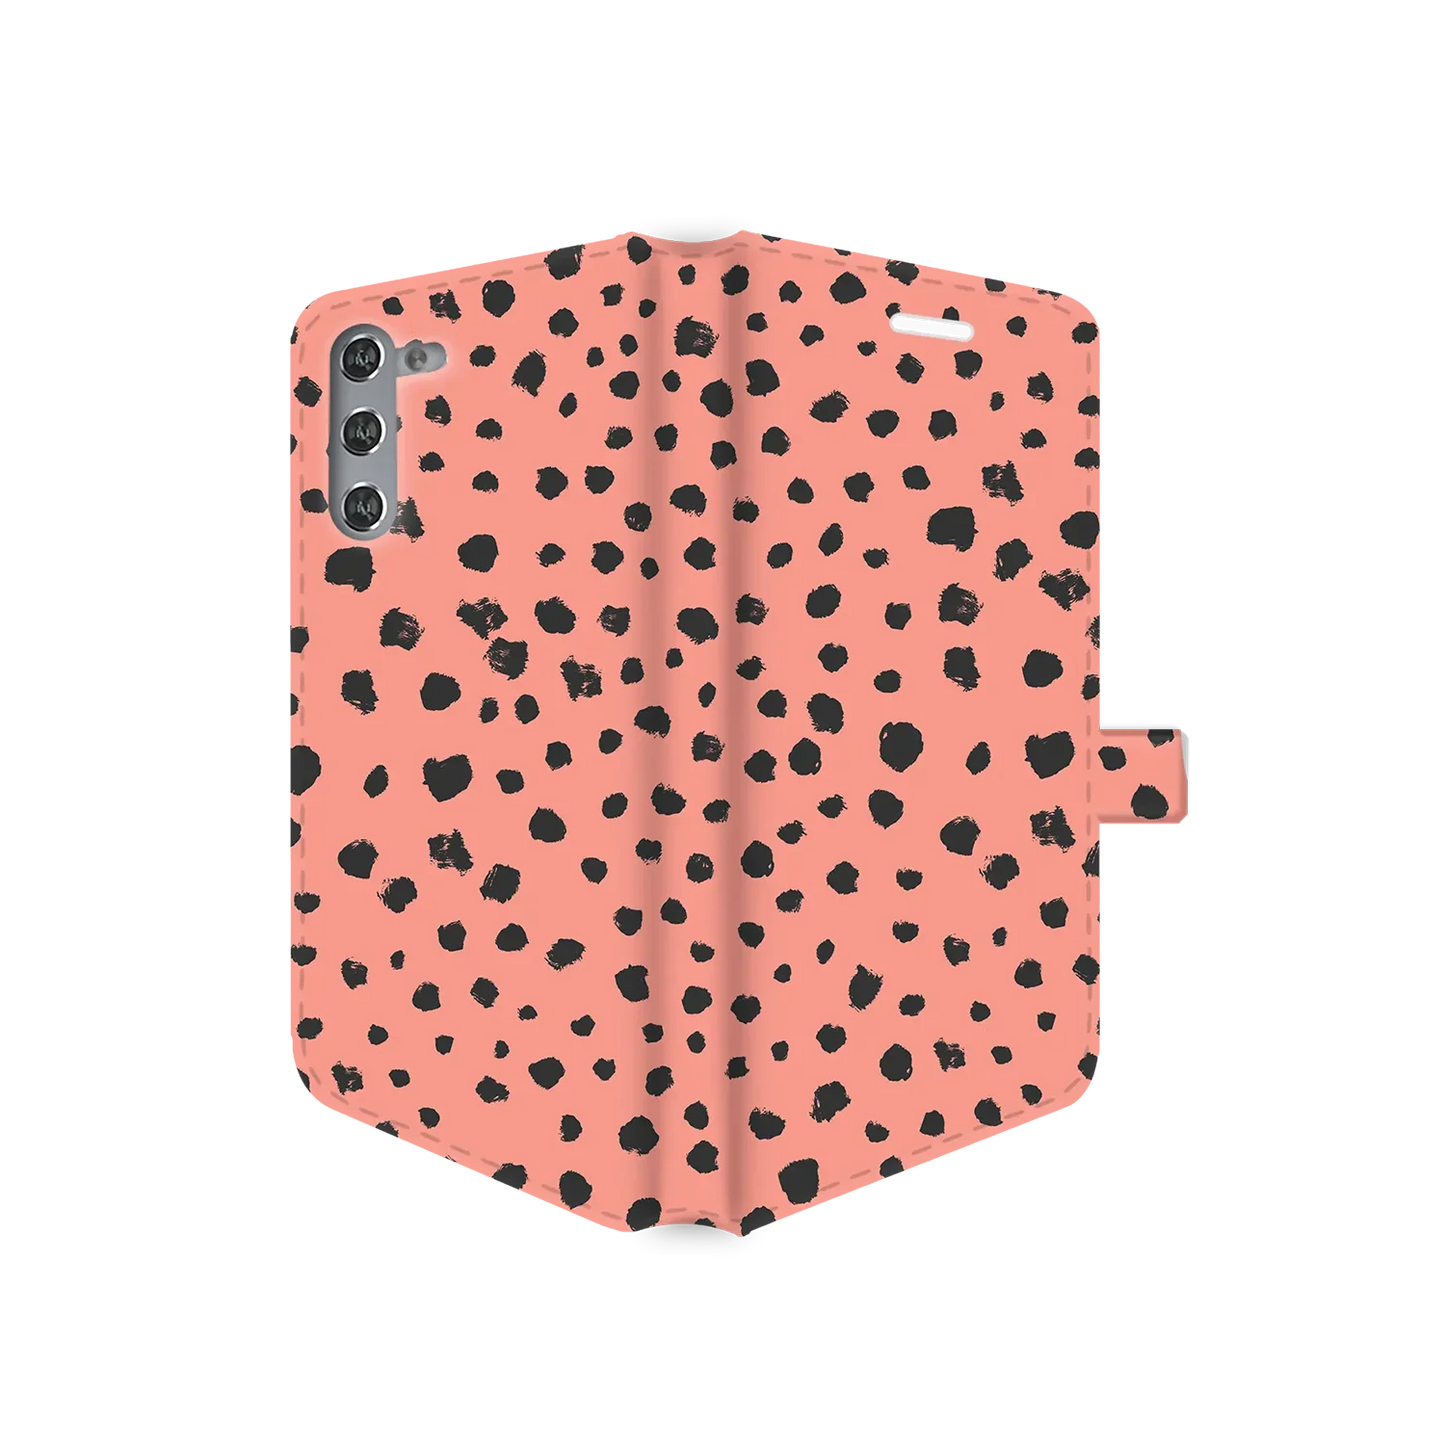 Grunge Dots - Personalised Galaxy S Case